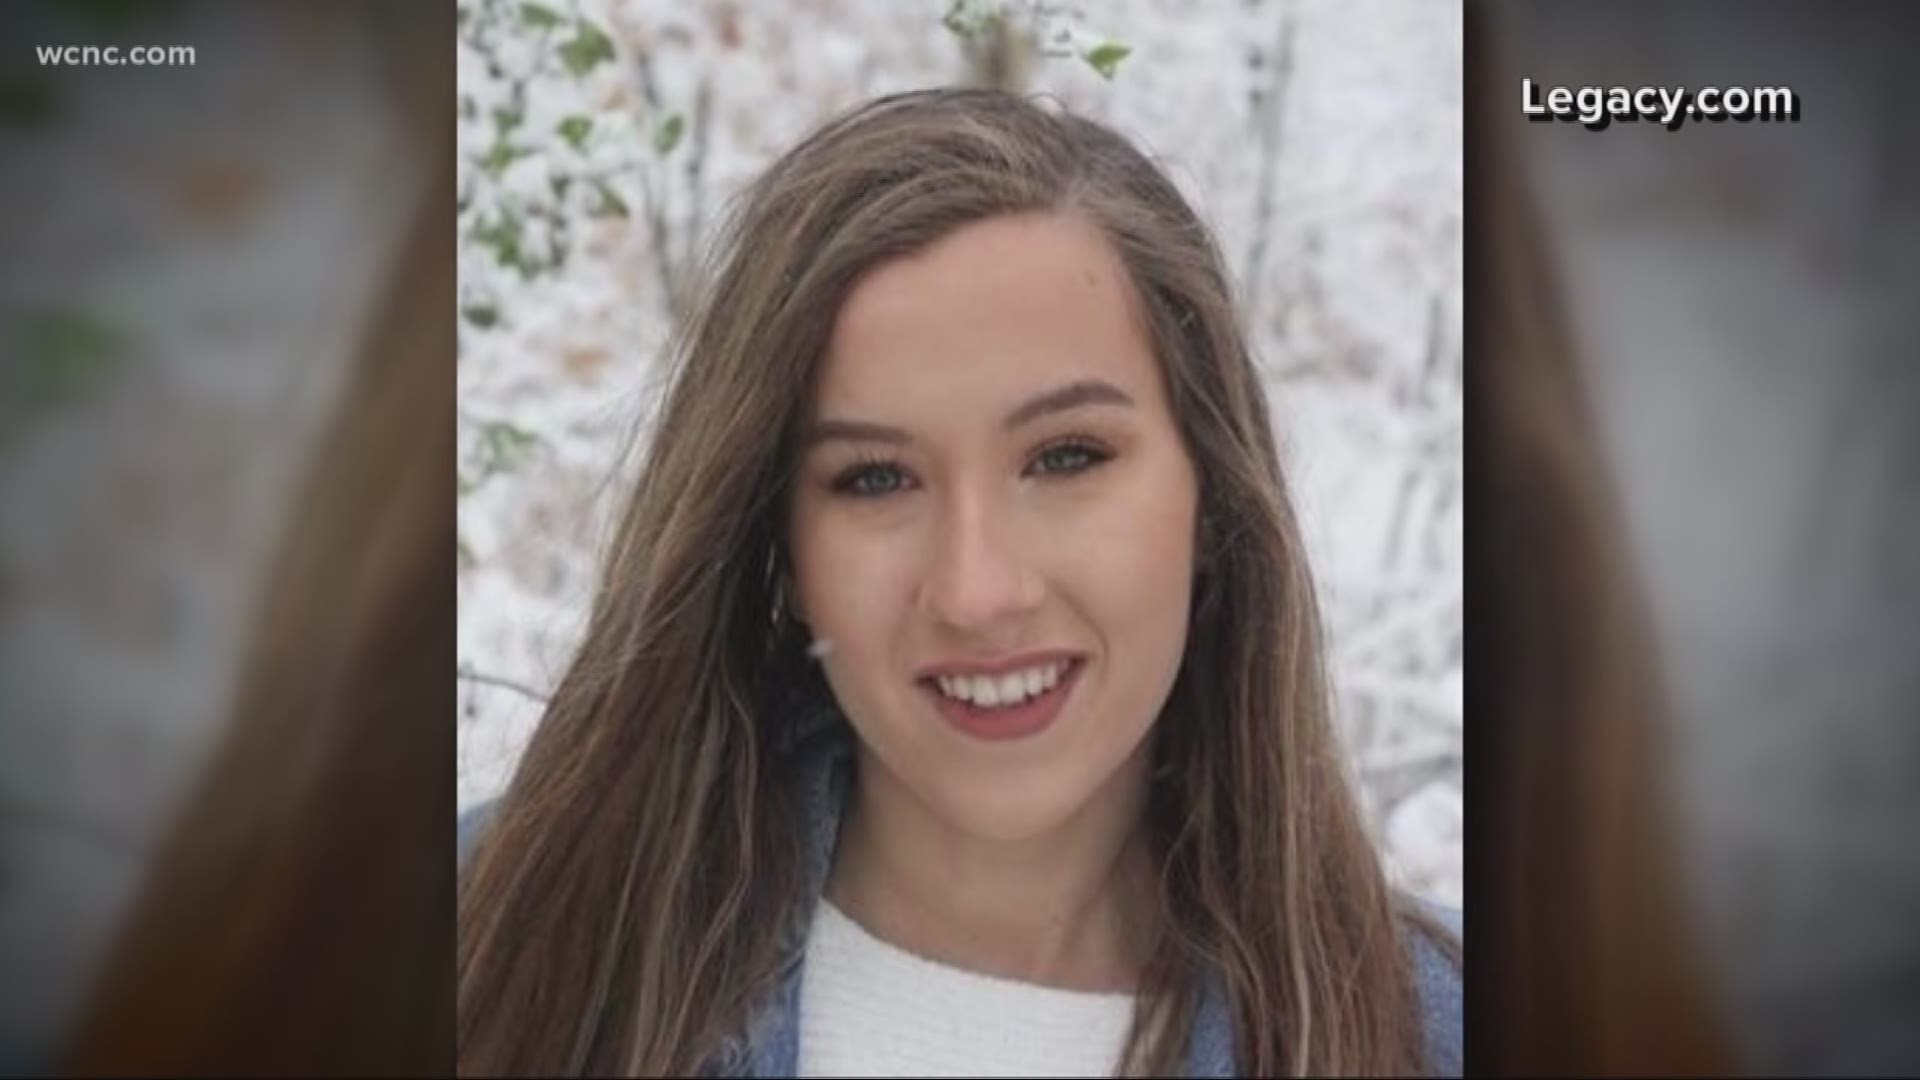 The UNC Charlotte student that was killed after falling from a party bus in northeast Charlotte on May 1 was likely drinking, according to a toxicology report.